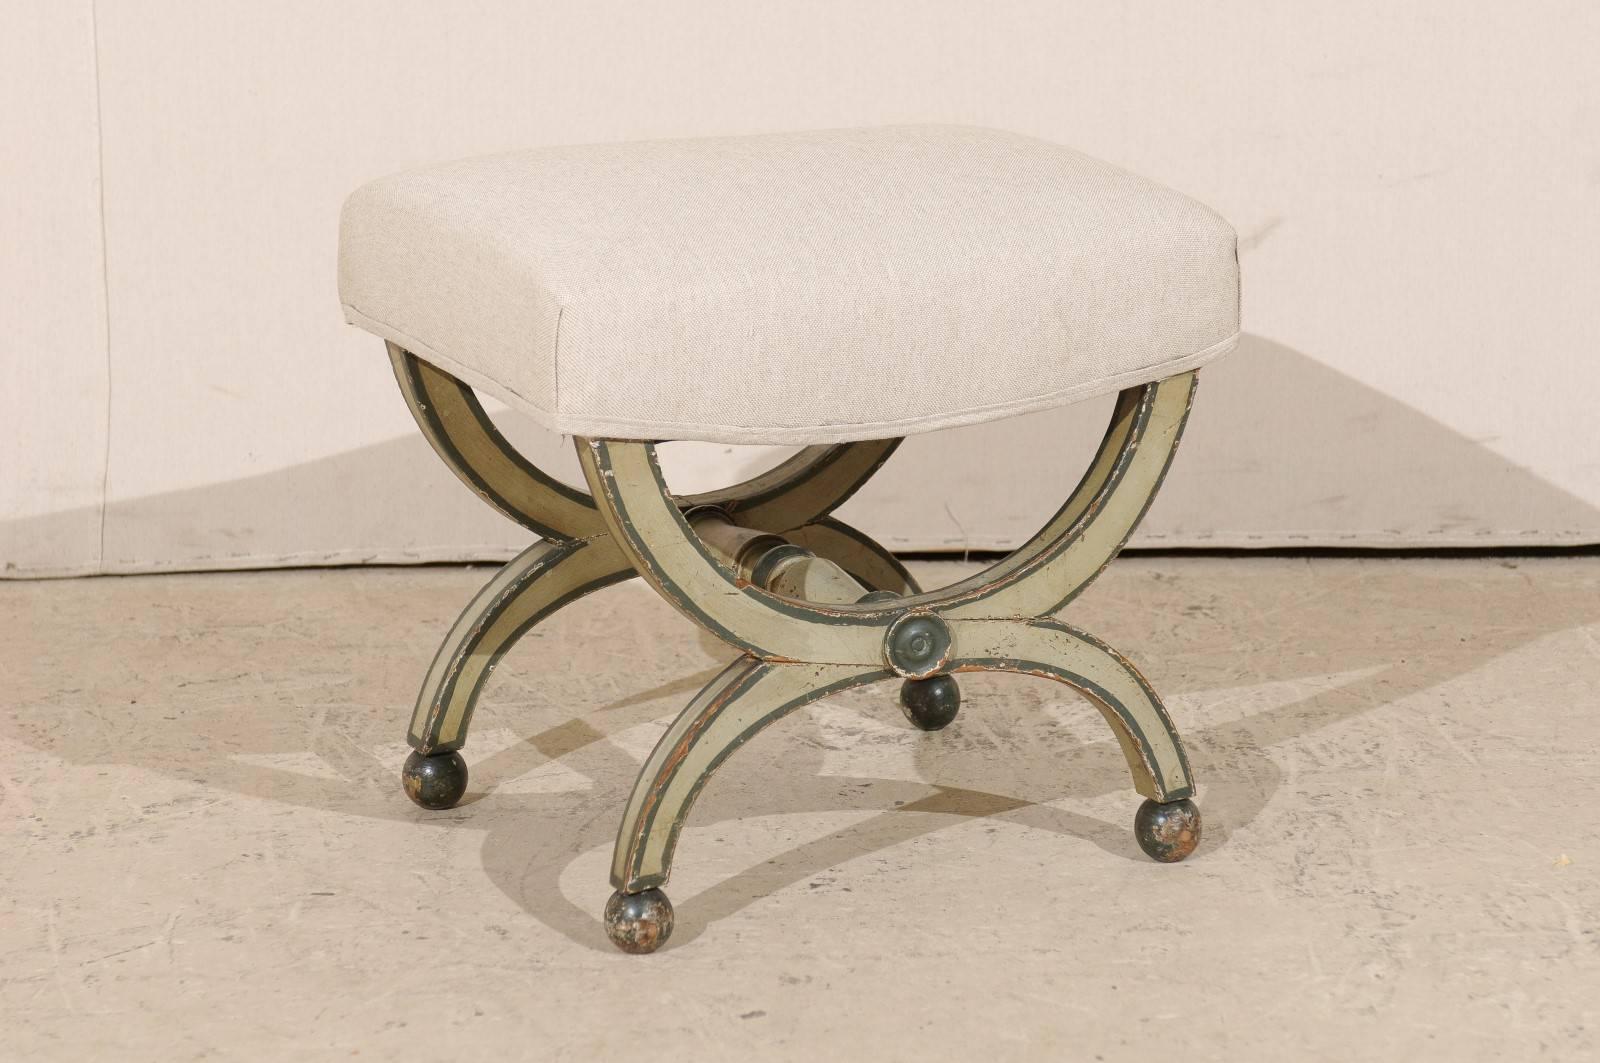 A French mid-19th century wood stool with original paint. This French Dante style stool features double half-moon legs that are connected by a turned cross stretcher. This stool sits on four ball feet and is adorned with circular rosette carvings on